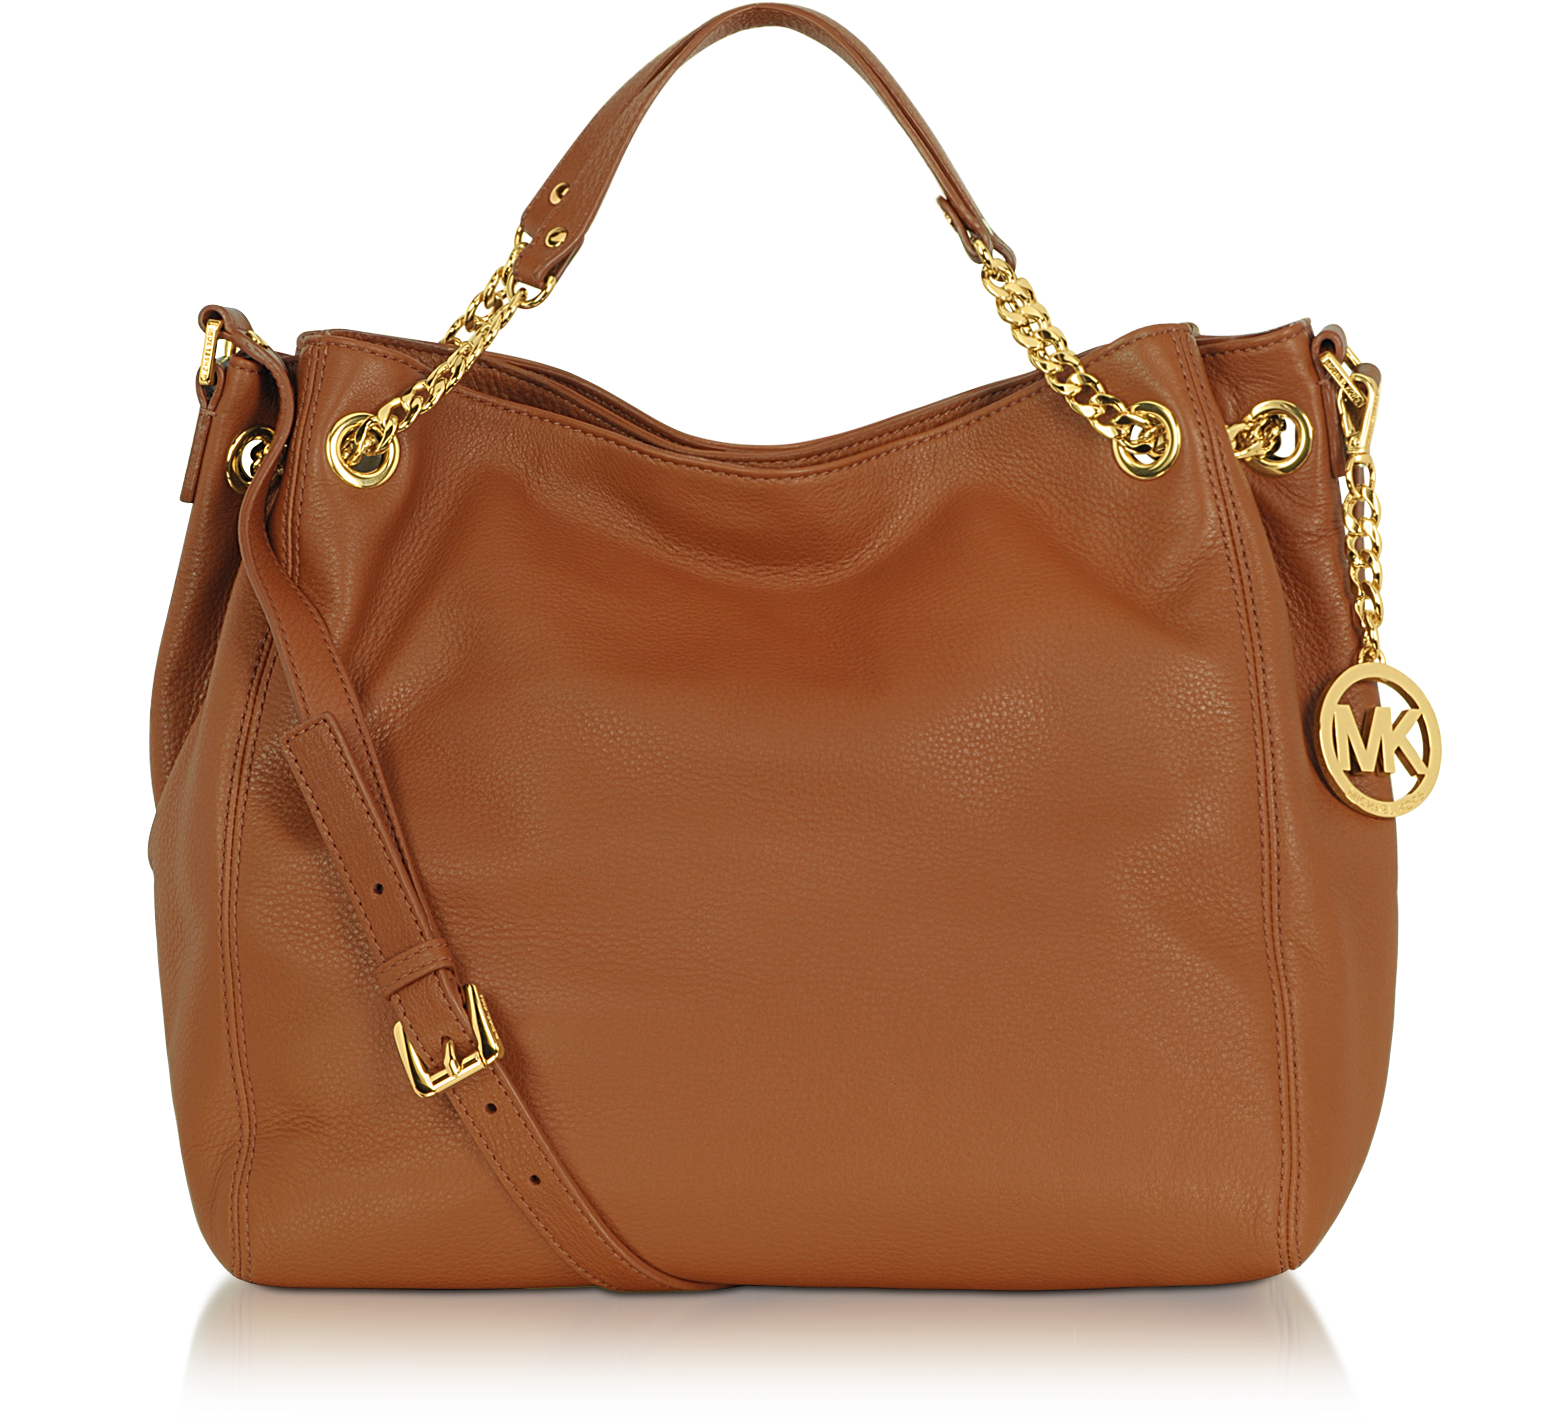 Michael Kors Brown Jet Set Chain Leather Tote at FORZIERI